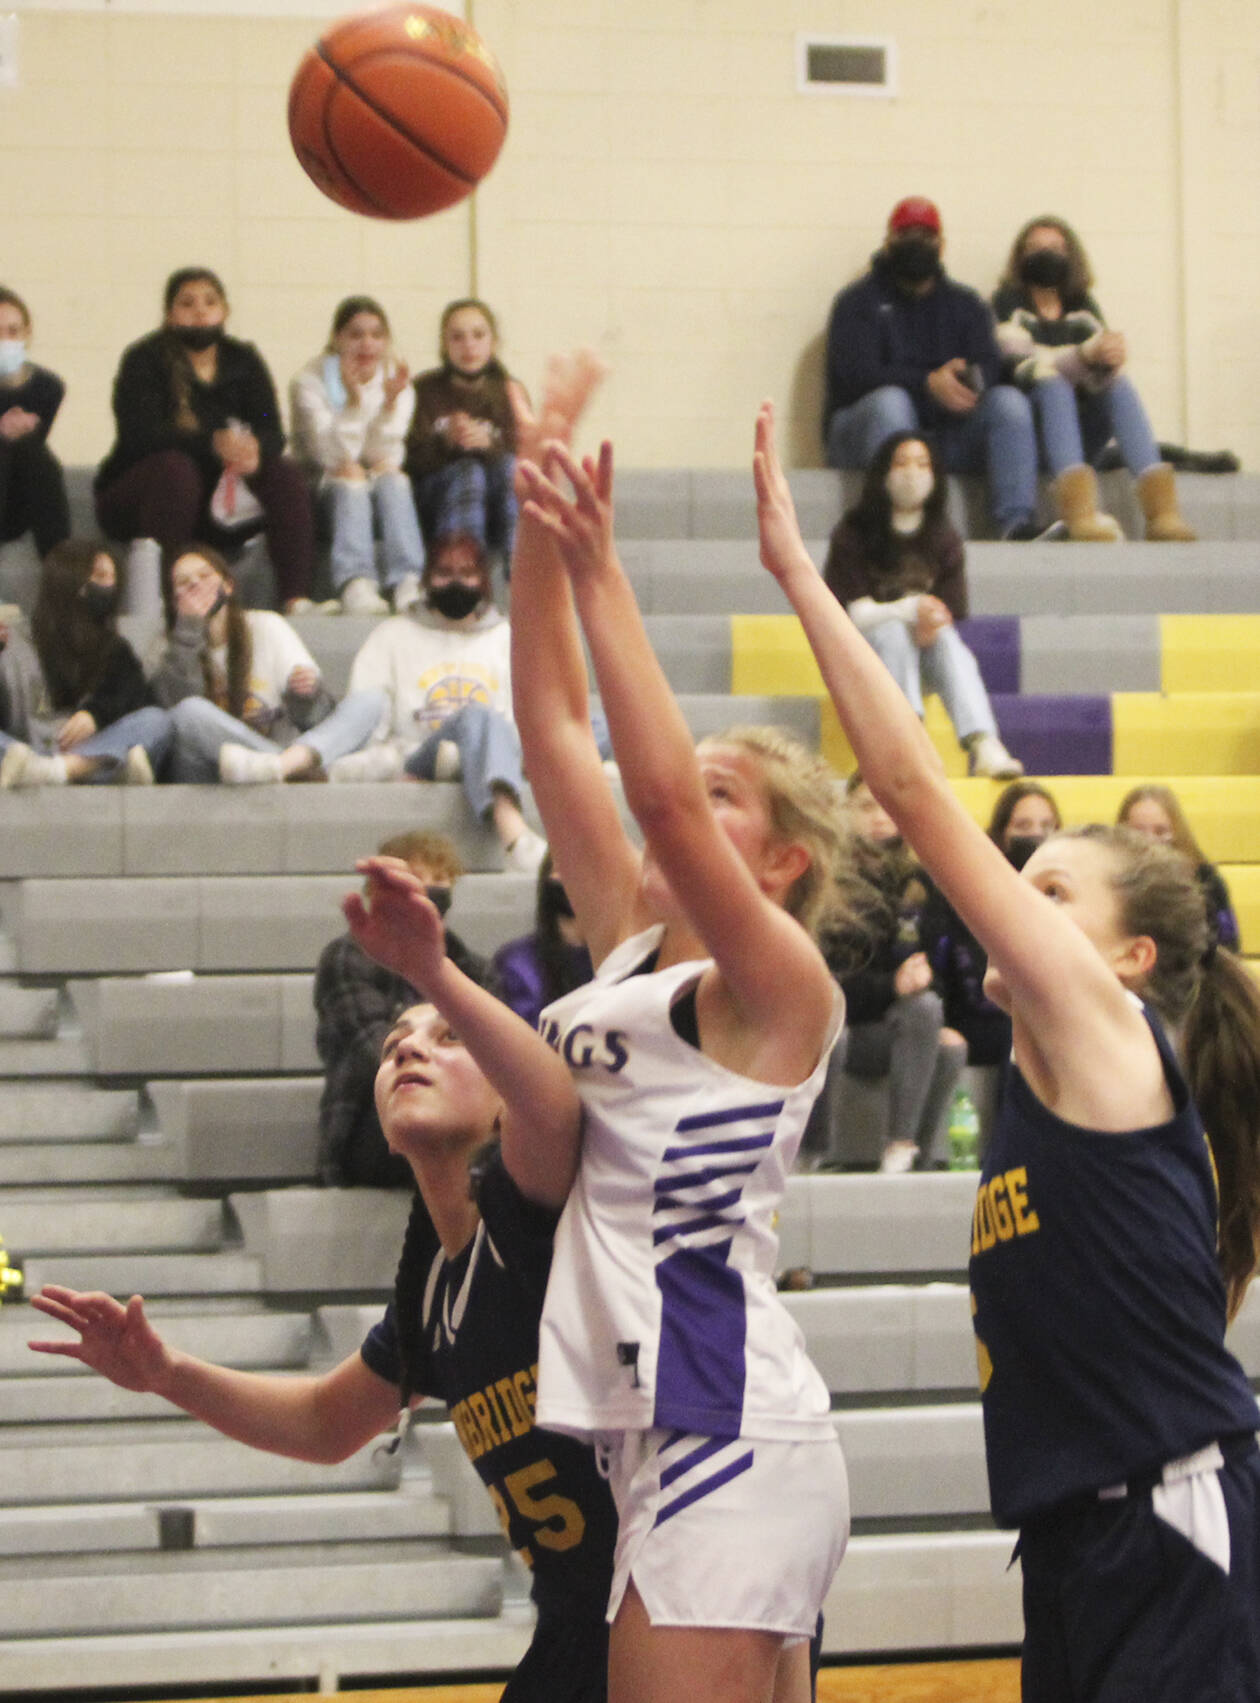 Evelyn Beers of North Kitsap puts up a shot against Bainbridge. The sophomore had 15 points.